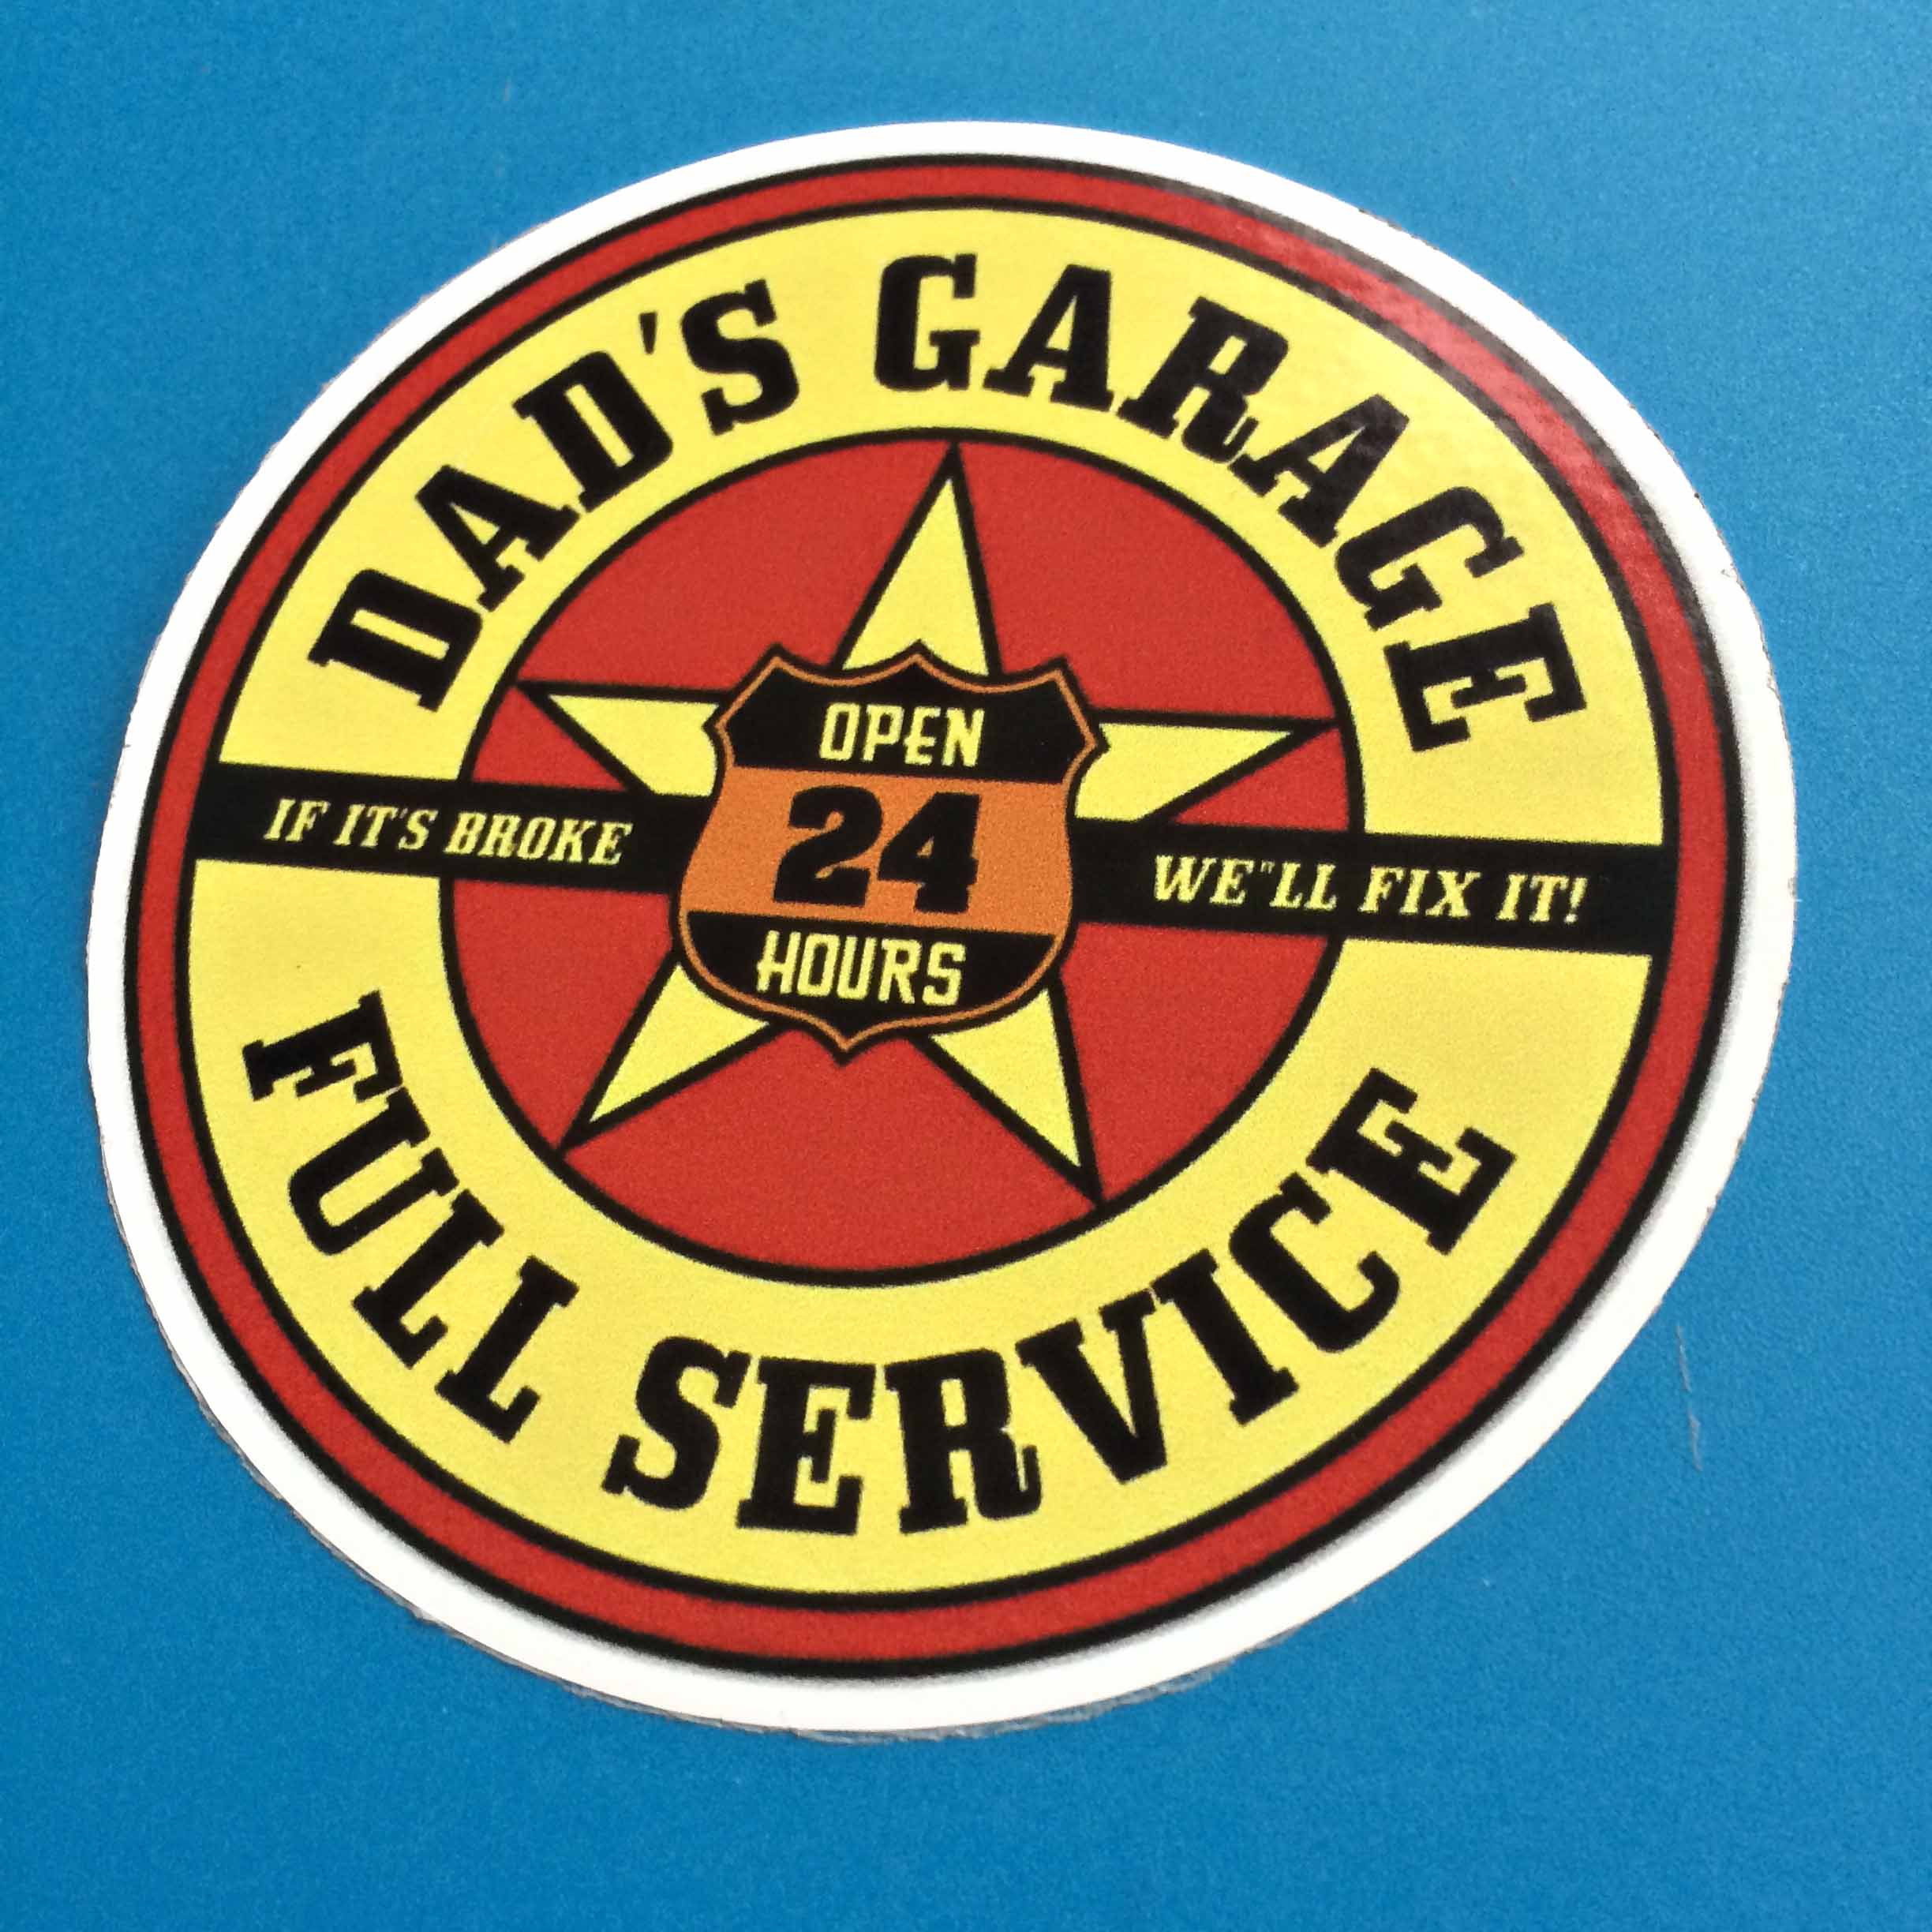 Two concentric circles in yellow and red. Dad's Garage Full Service in black lettering surrounds the yellow circle. In the red circle is a yellow star overlaid with a black and orange shield, Open 24 Hours. Across the sticker is a black banner, If It's Broke We'll Fix It!